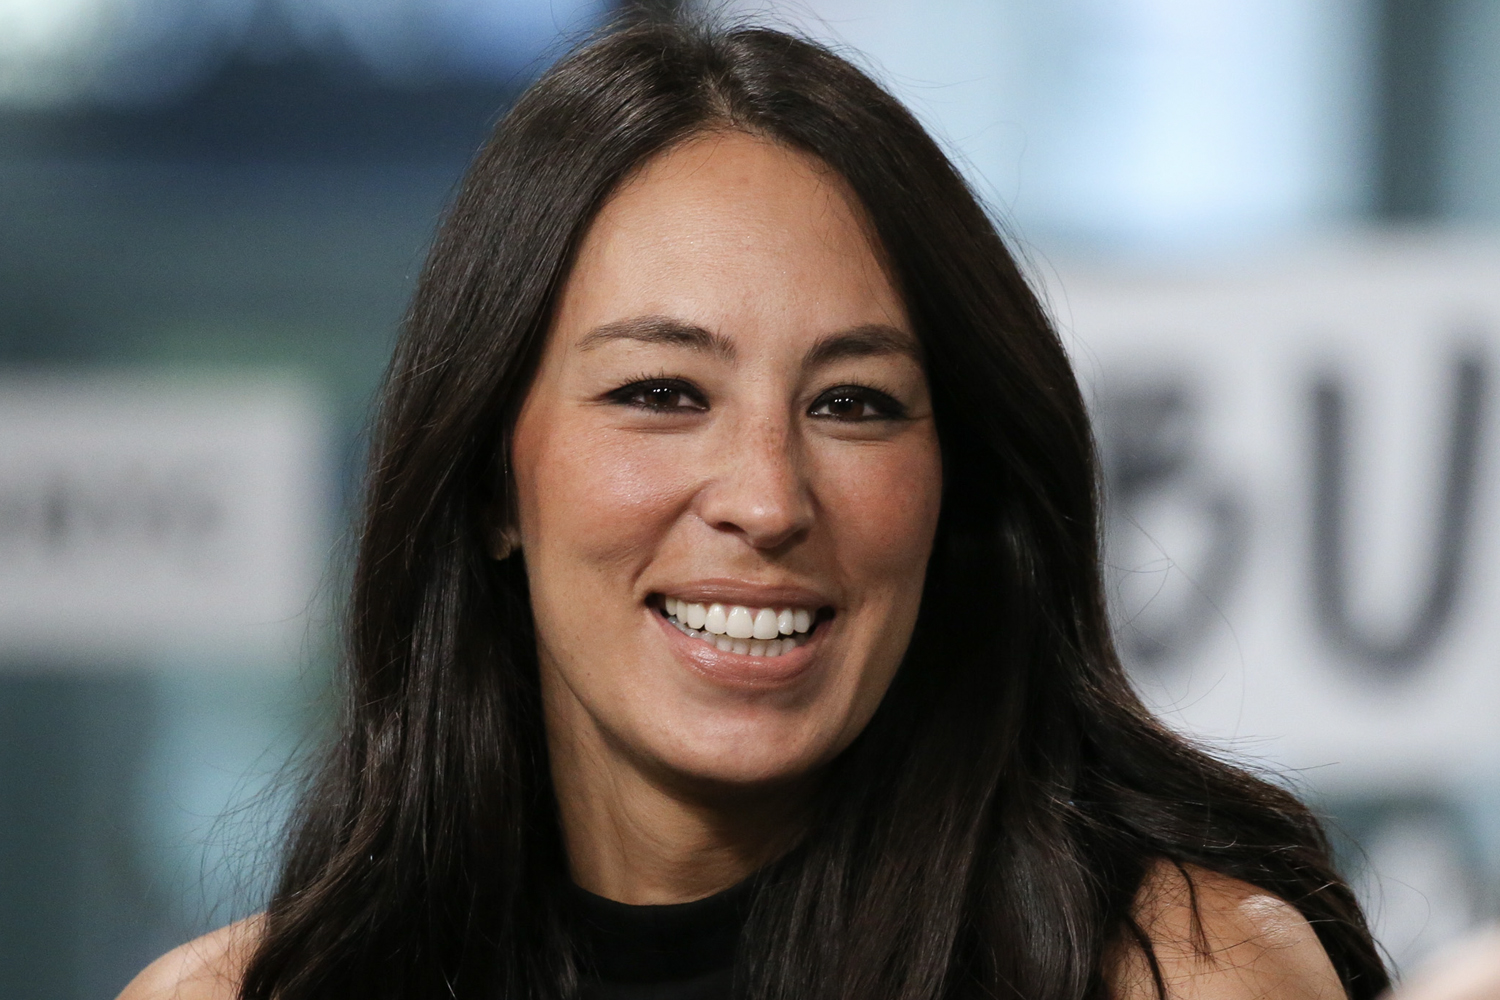 Joanna Gaines smiling during an interview